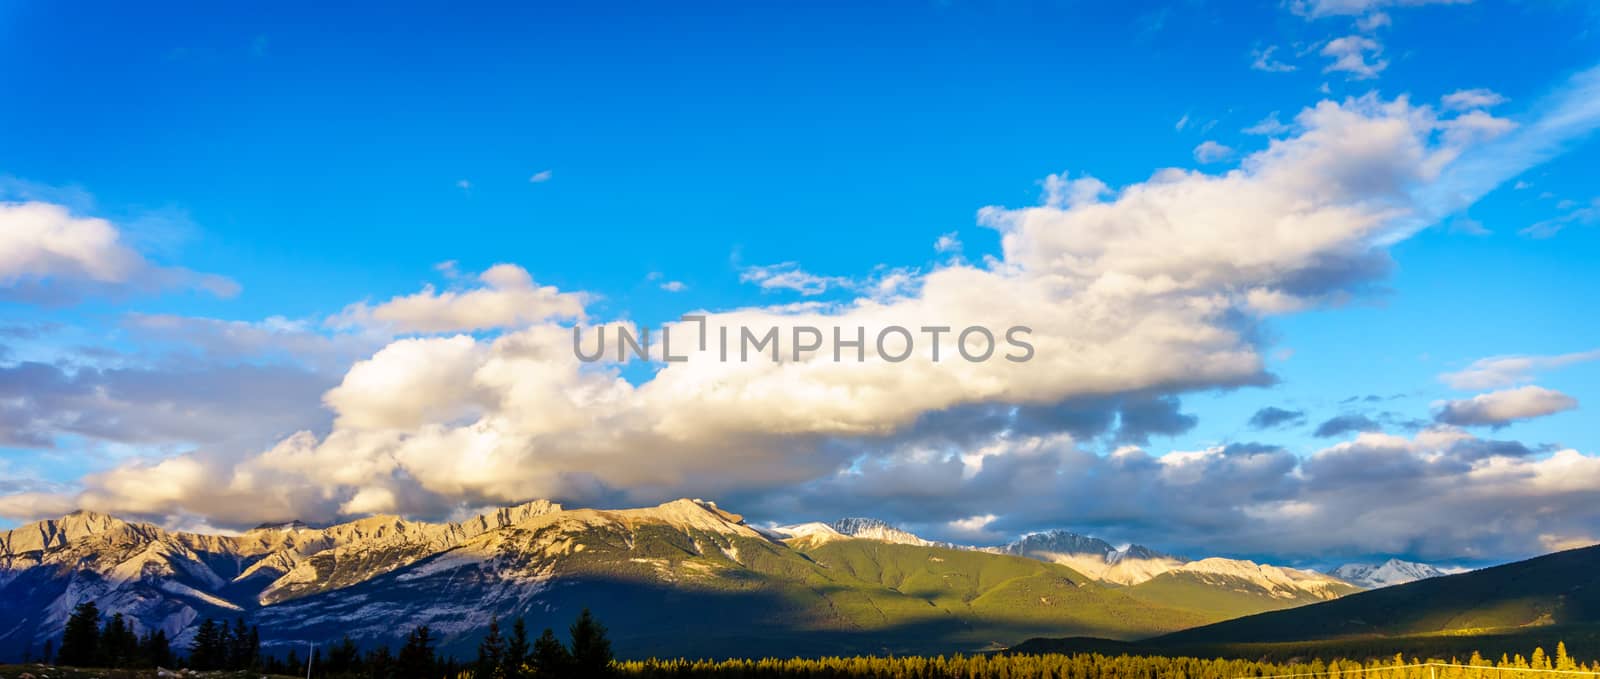 Sunrise over the Jasper Mountains by hpbfotos